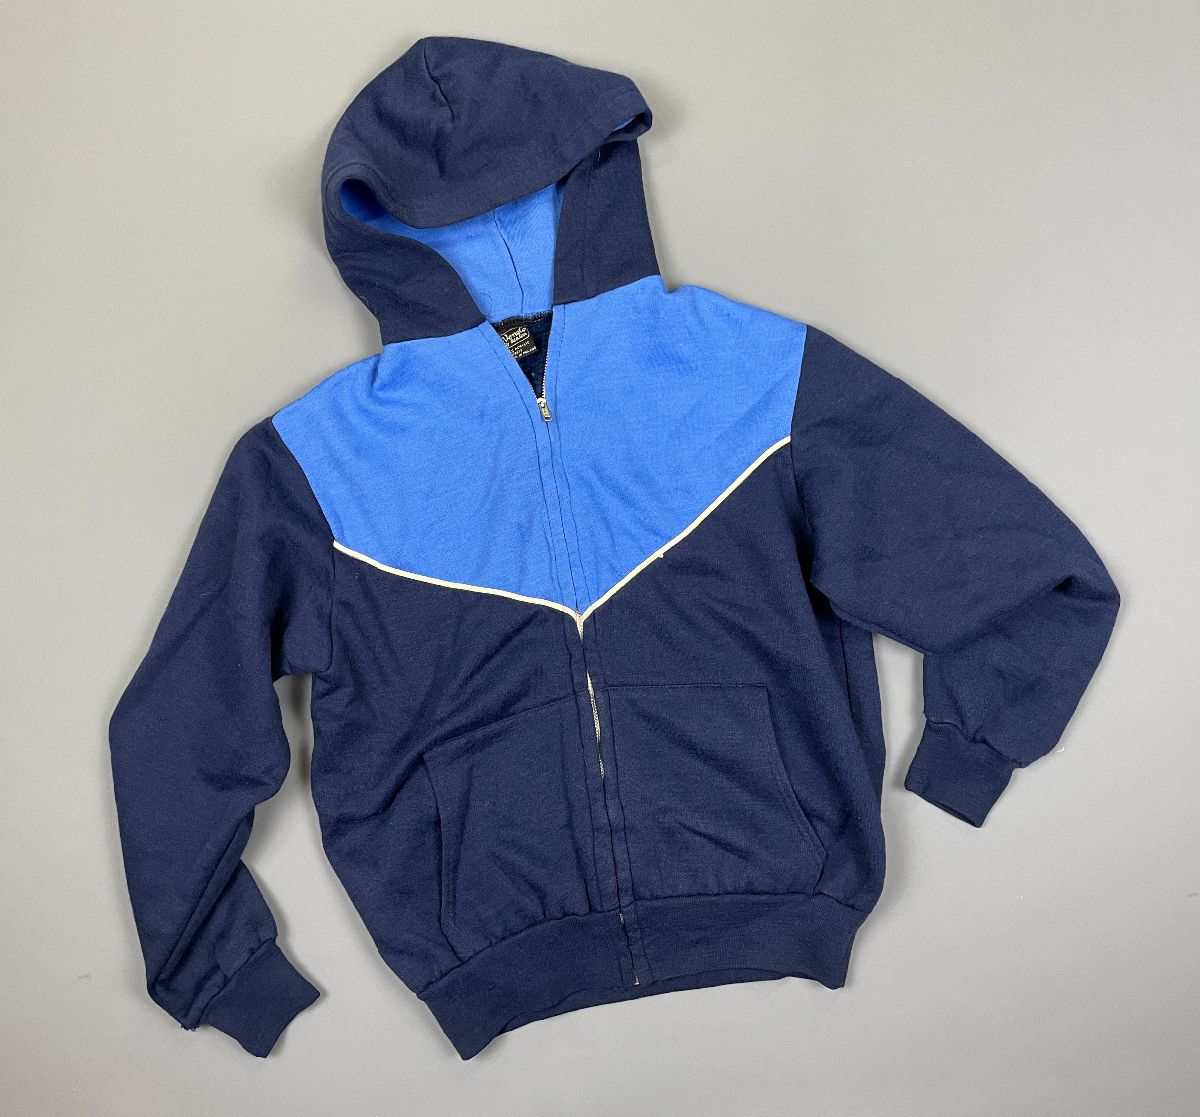 product details: AWESOME! 1960S-70S ZIPUP COLOR BLOCK HOODED SWEATSHIRT W/ PIPING TRIM photo